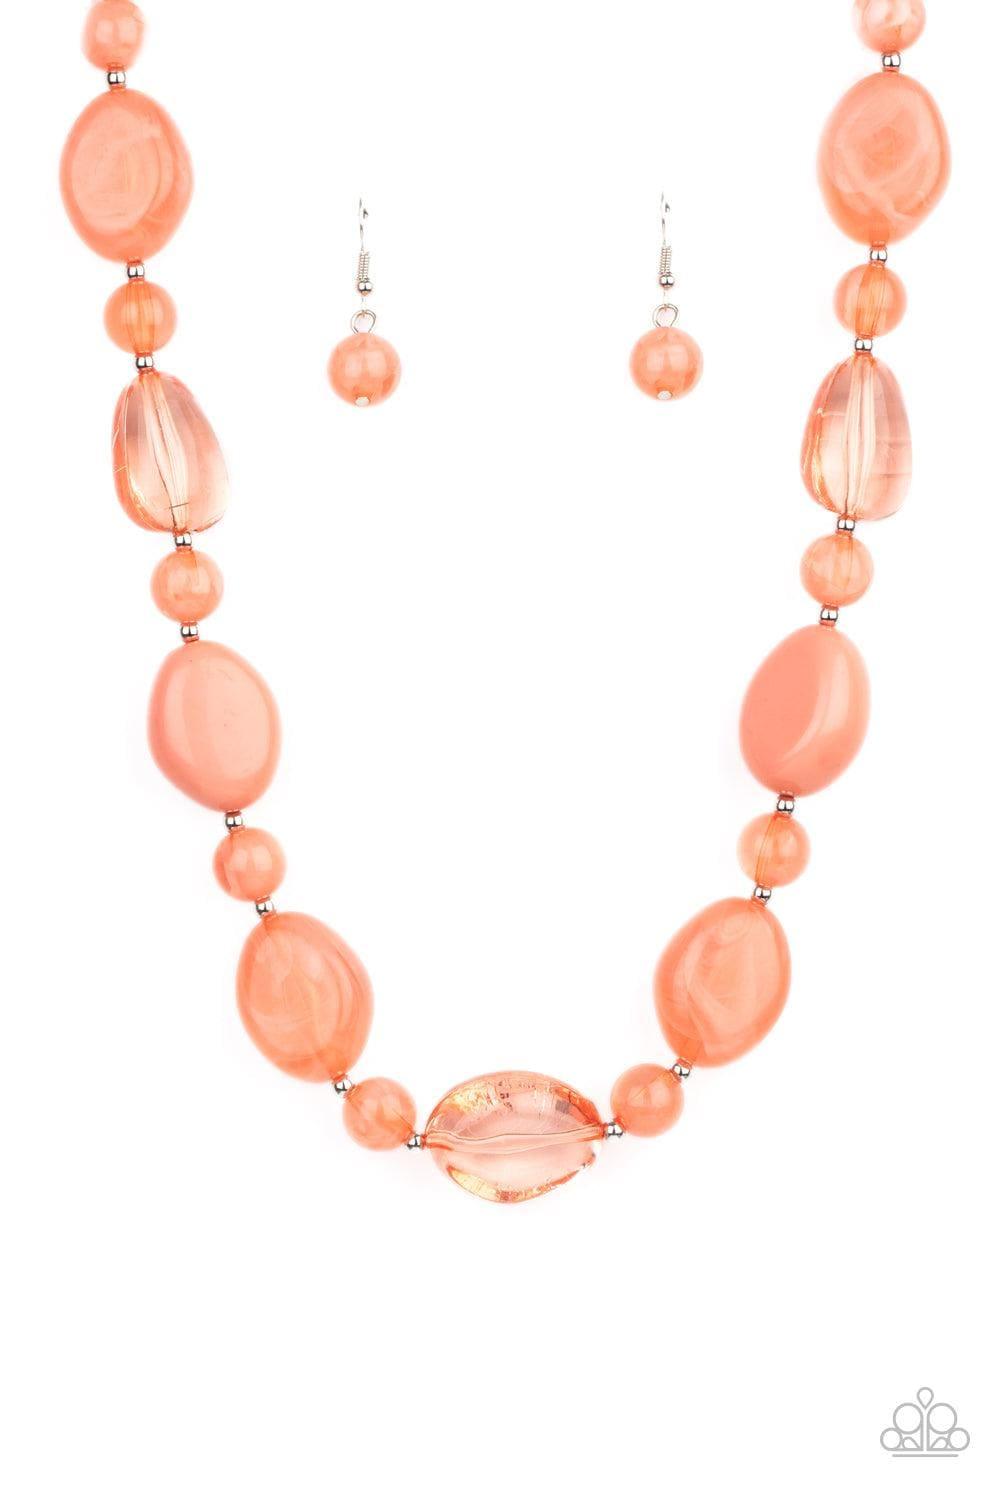 Paparazzi Accessories - Staycation Stunner - Orange Necklace - Bling by JessieK